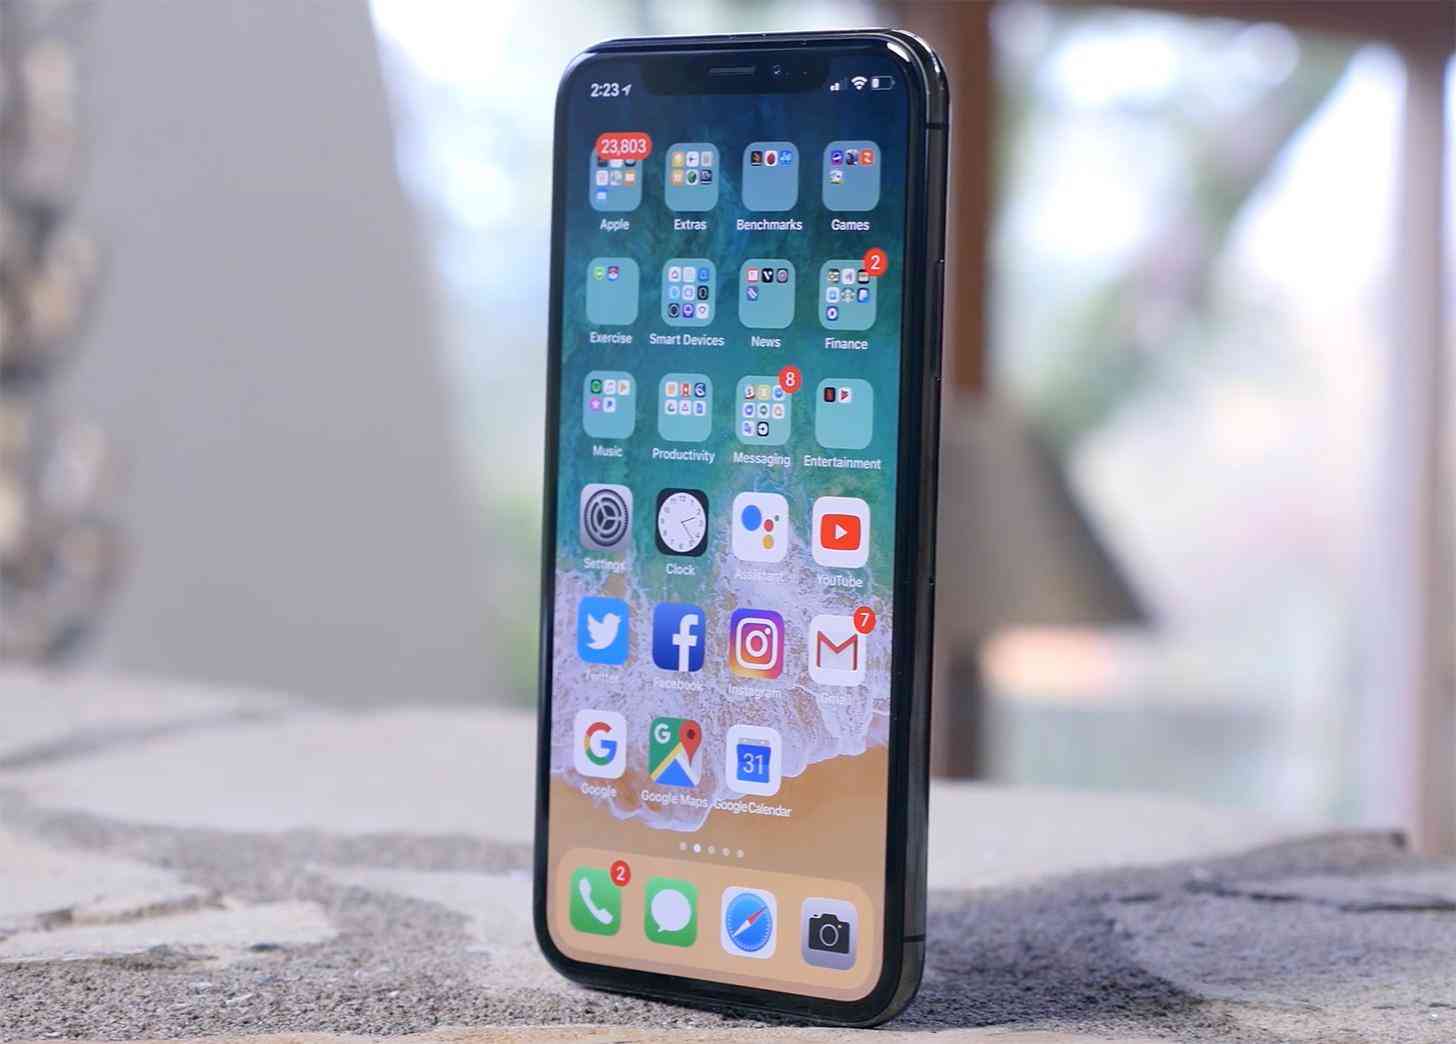 iPhone X hands-on photo